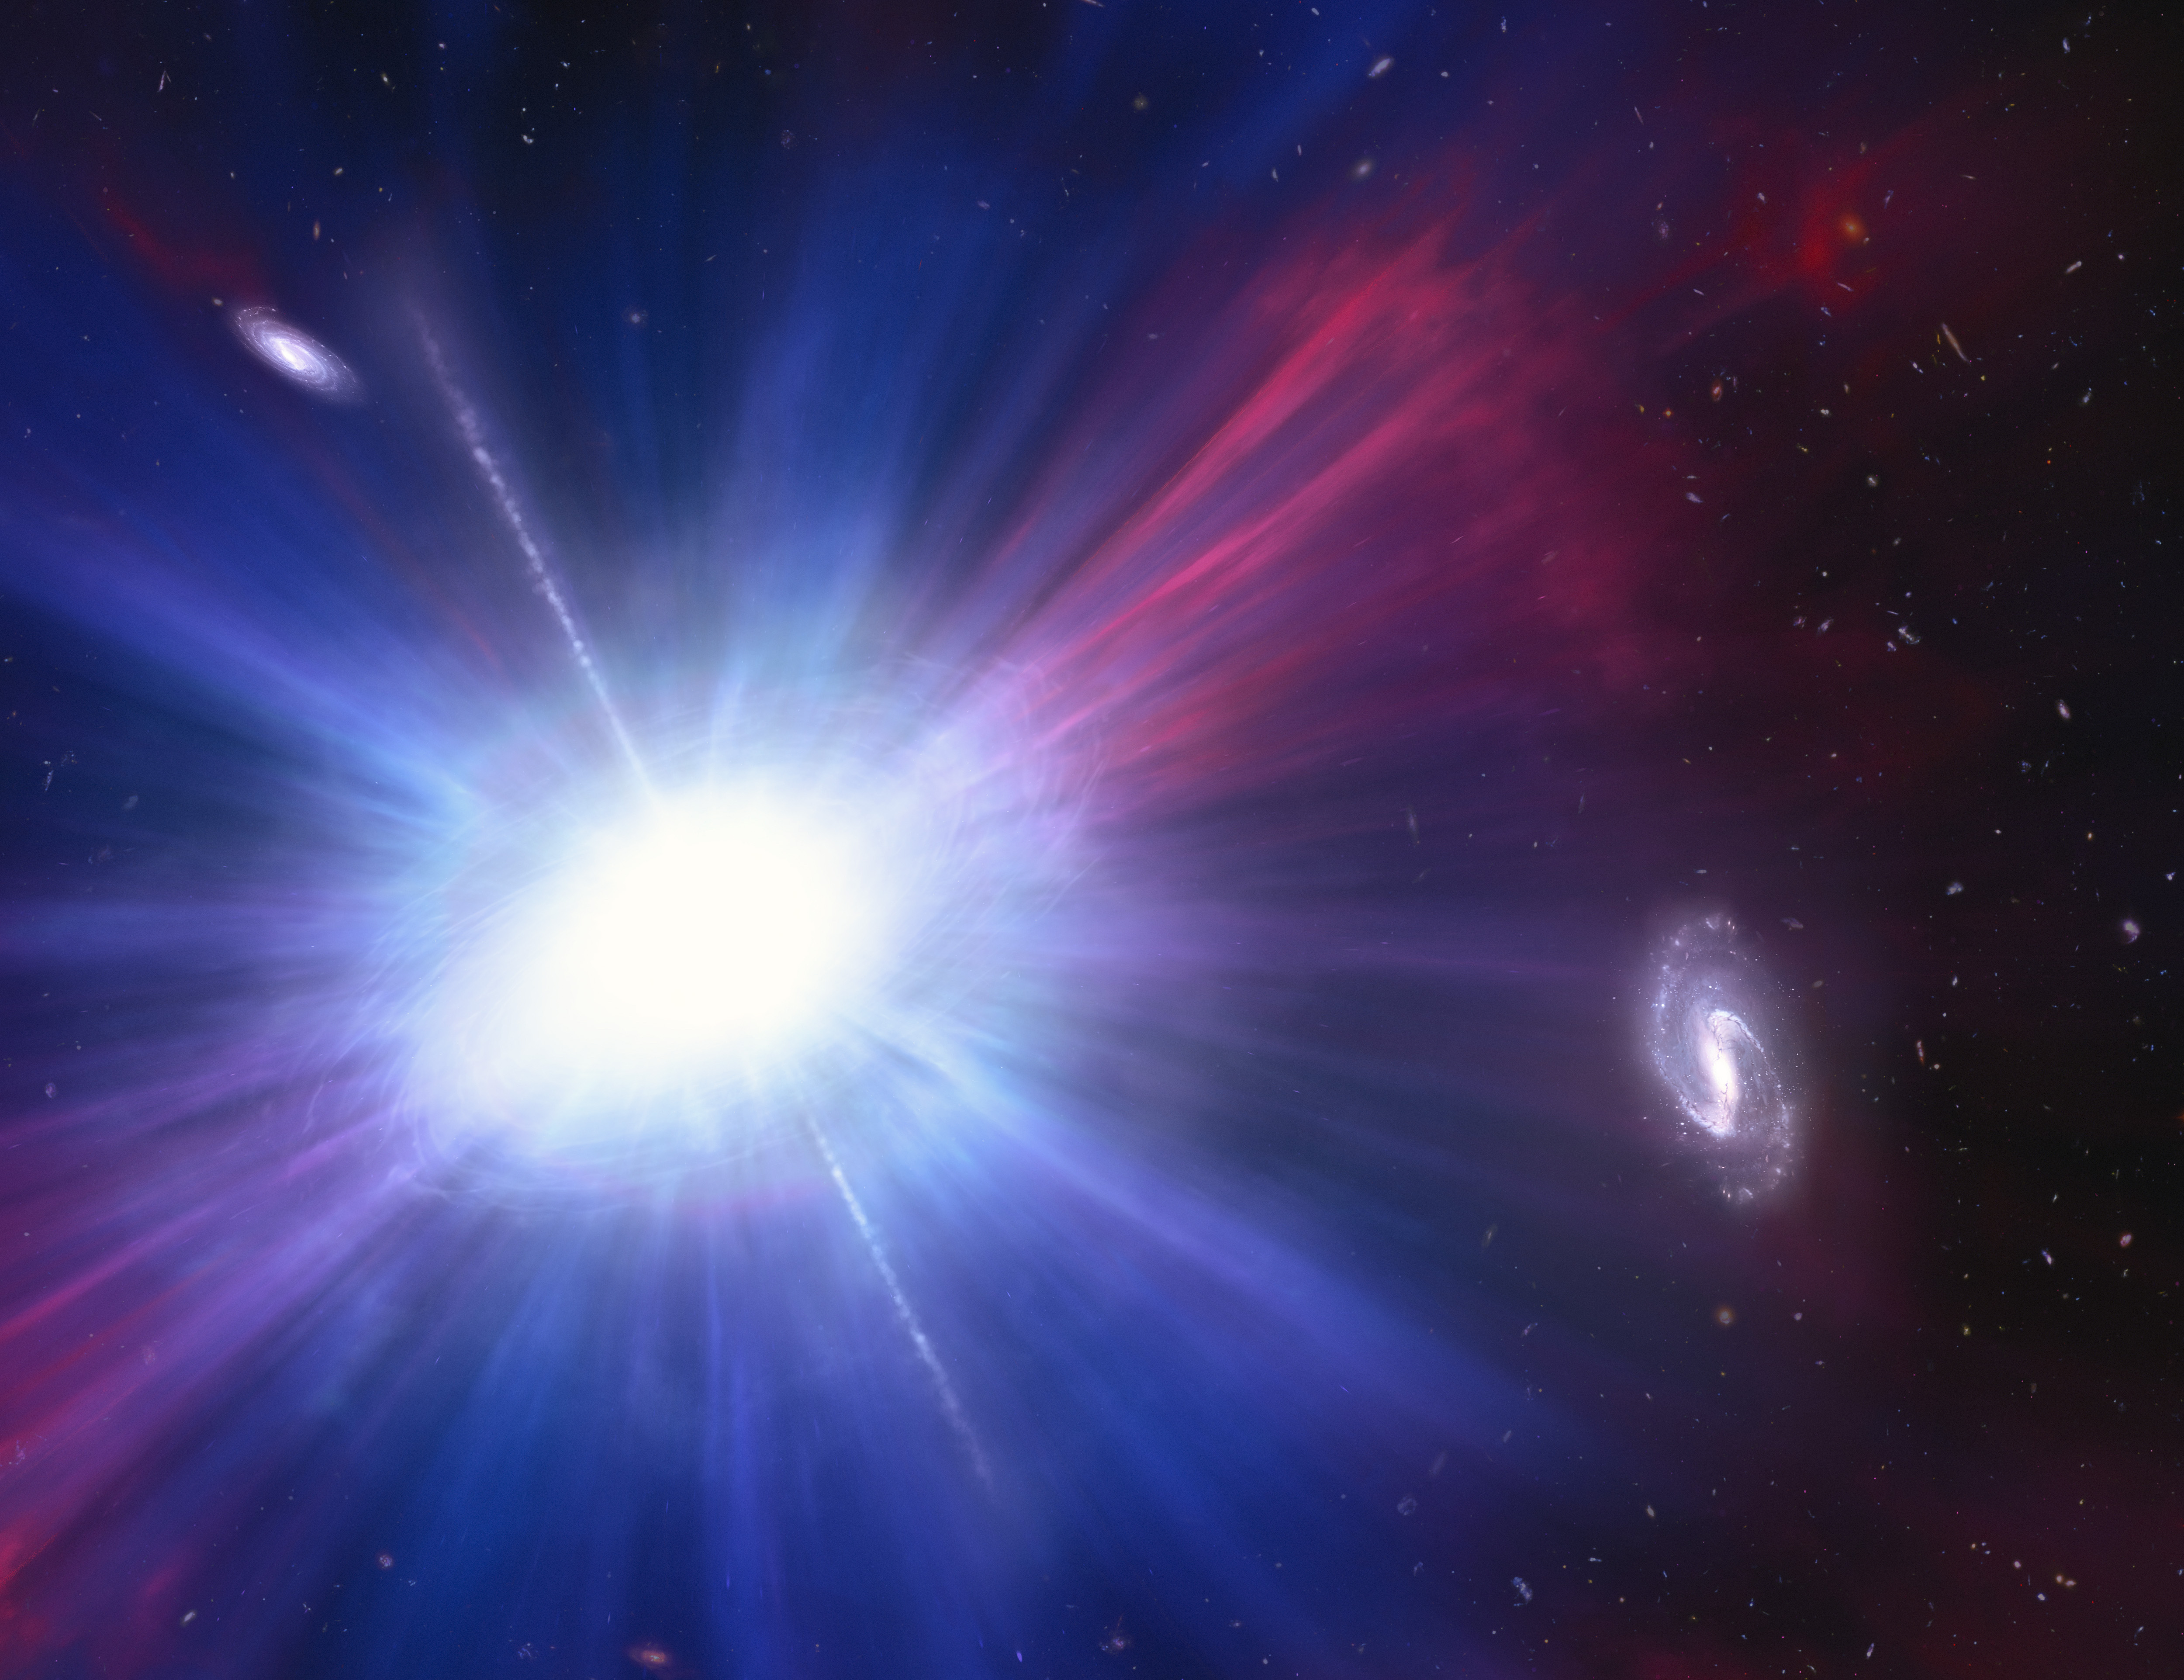 An artist’s representation of one of brightest explosions ever seen in space, an LFBOT. Called a Luminous Fast Blue Optical Transient (LFBOT). Credit: NASA, ESA, NSF's NOIRLab, Mark Garlick , Mahdi Zamani